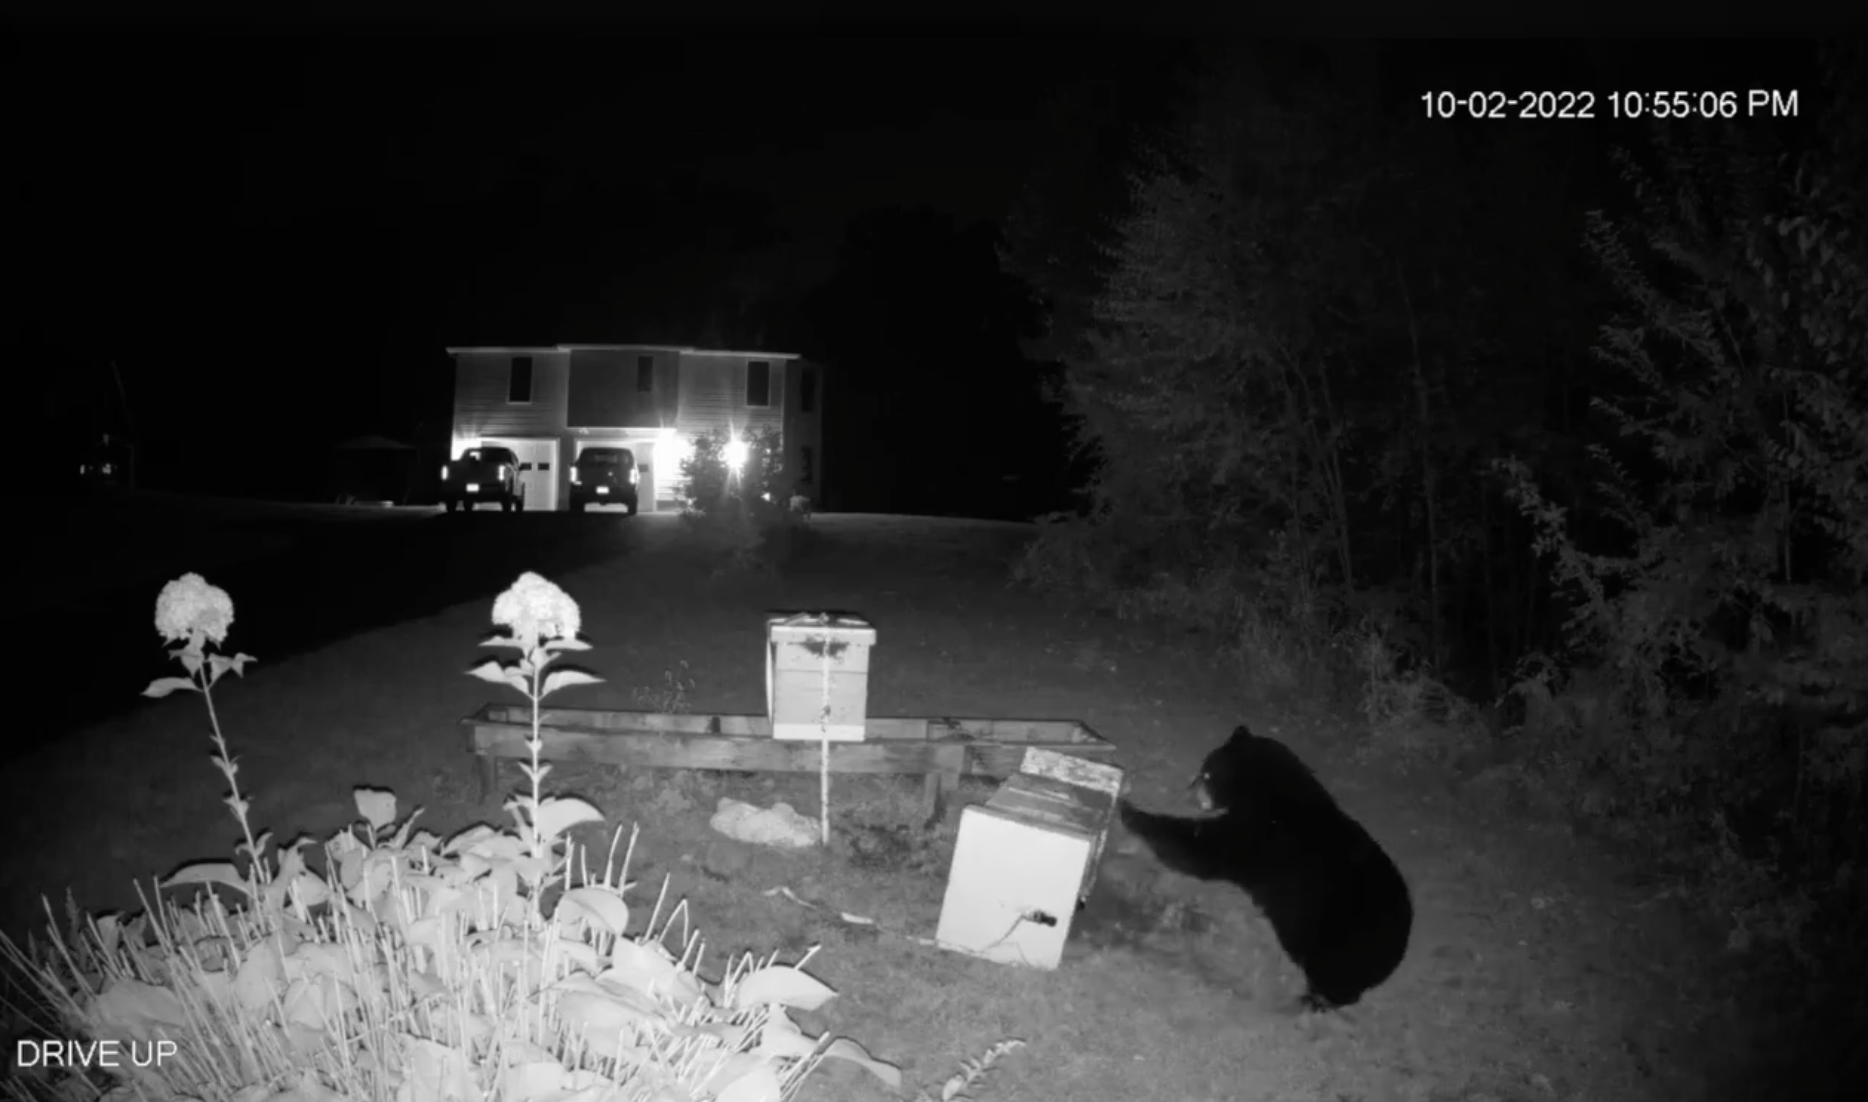 Bear in Somers fights off bee stings for honey pic pic